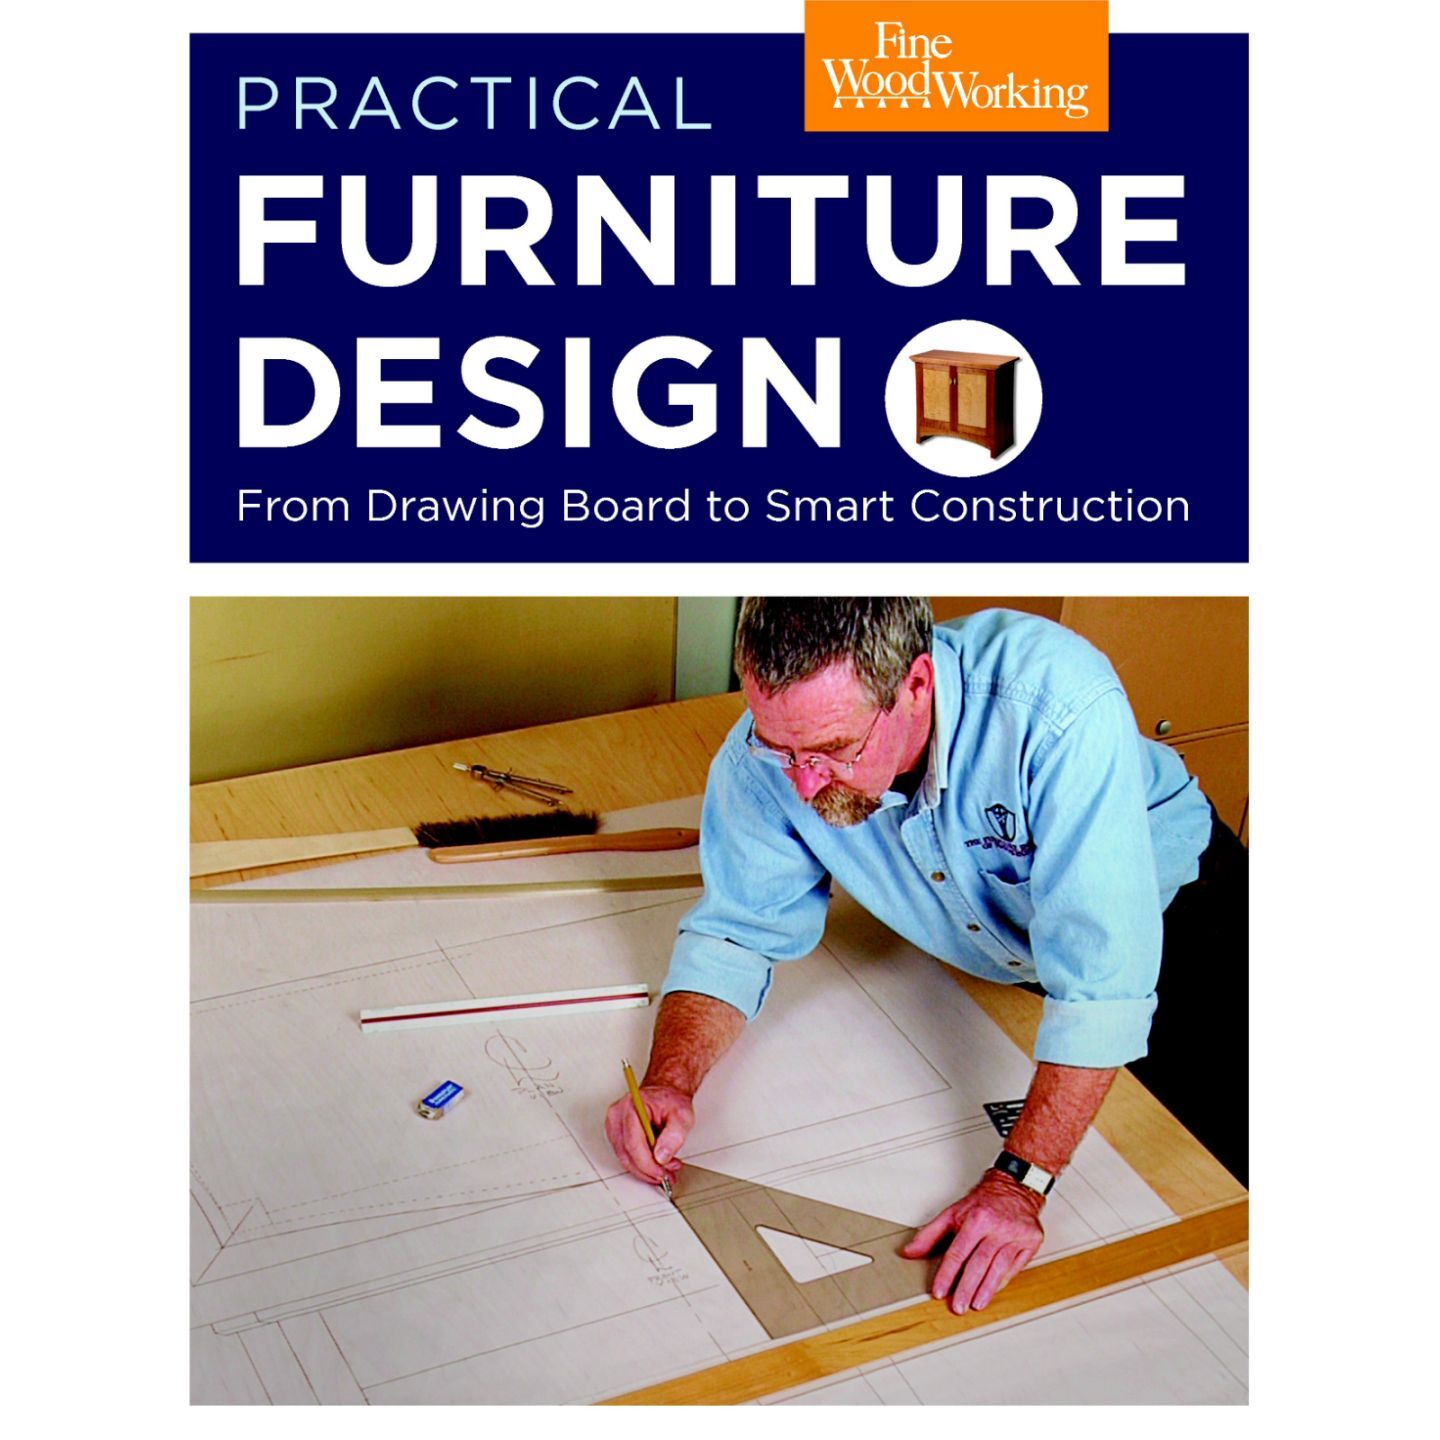 Practical Furniture Design: From Drawing Board to Smart Construction